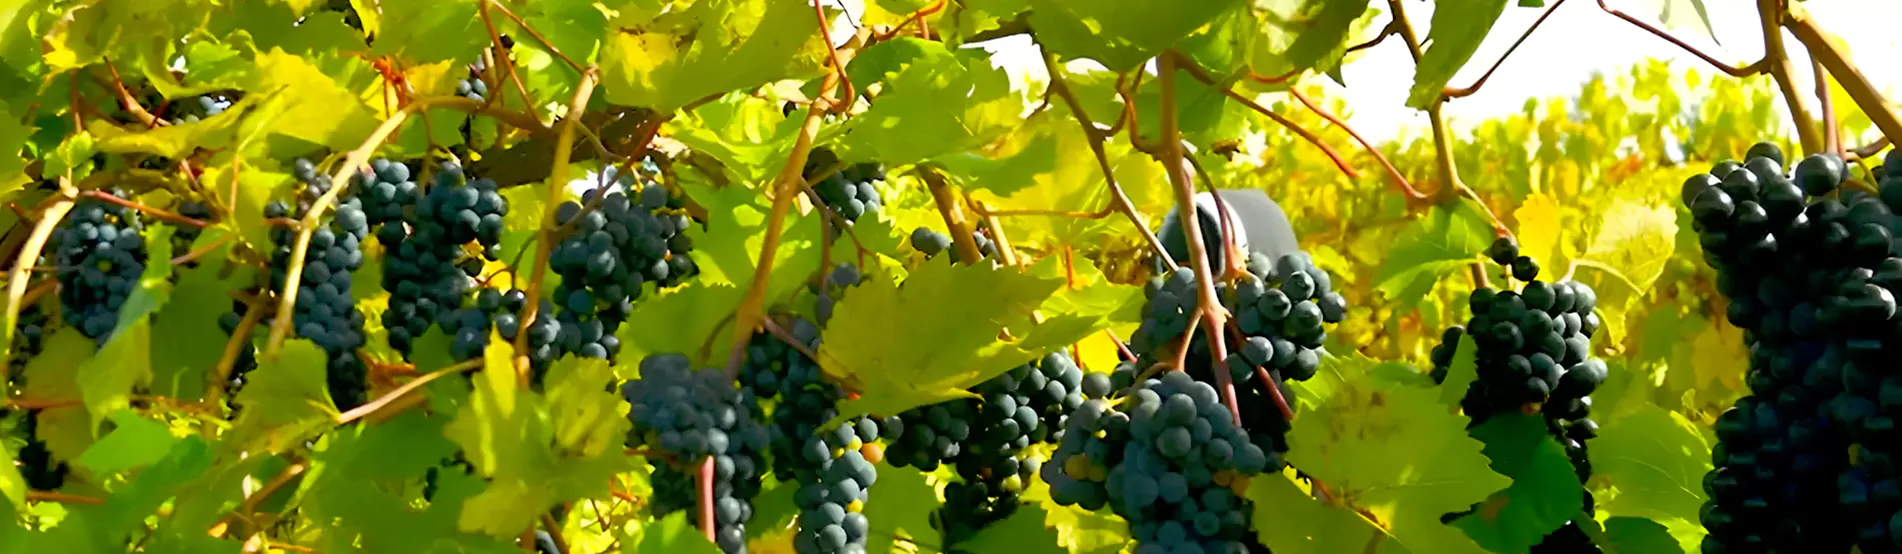 A cluster of ripe grapes hanging on a vine, ready to be harvested.